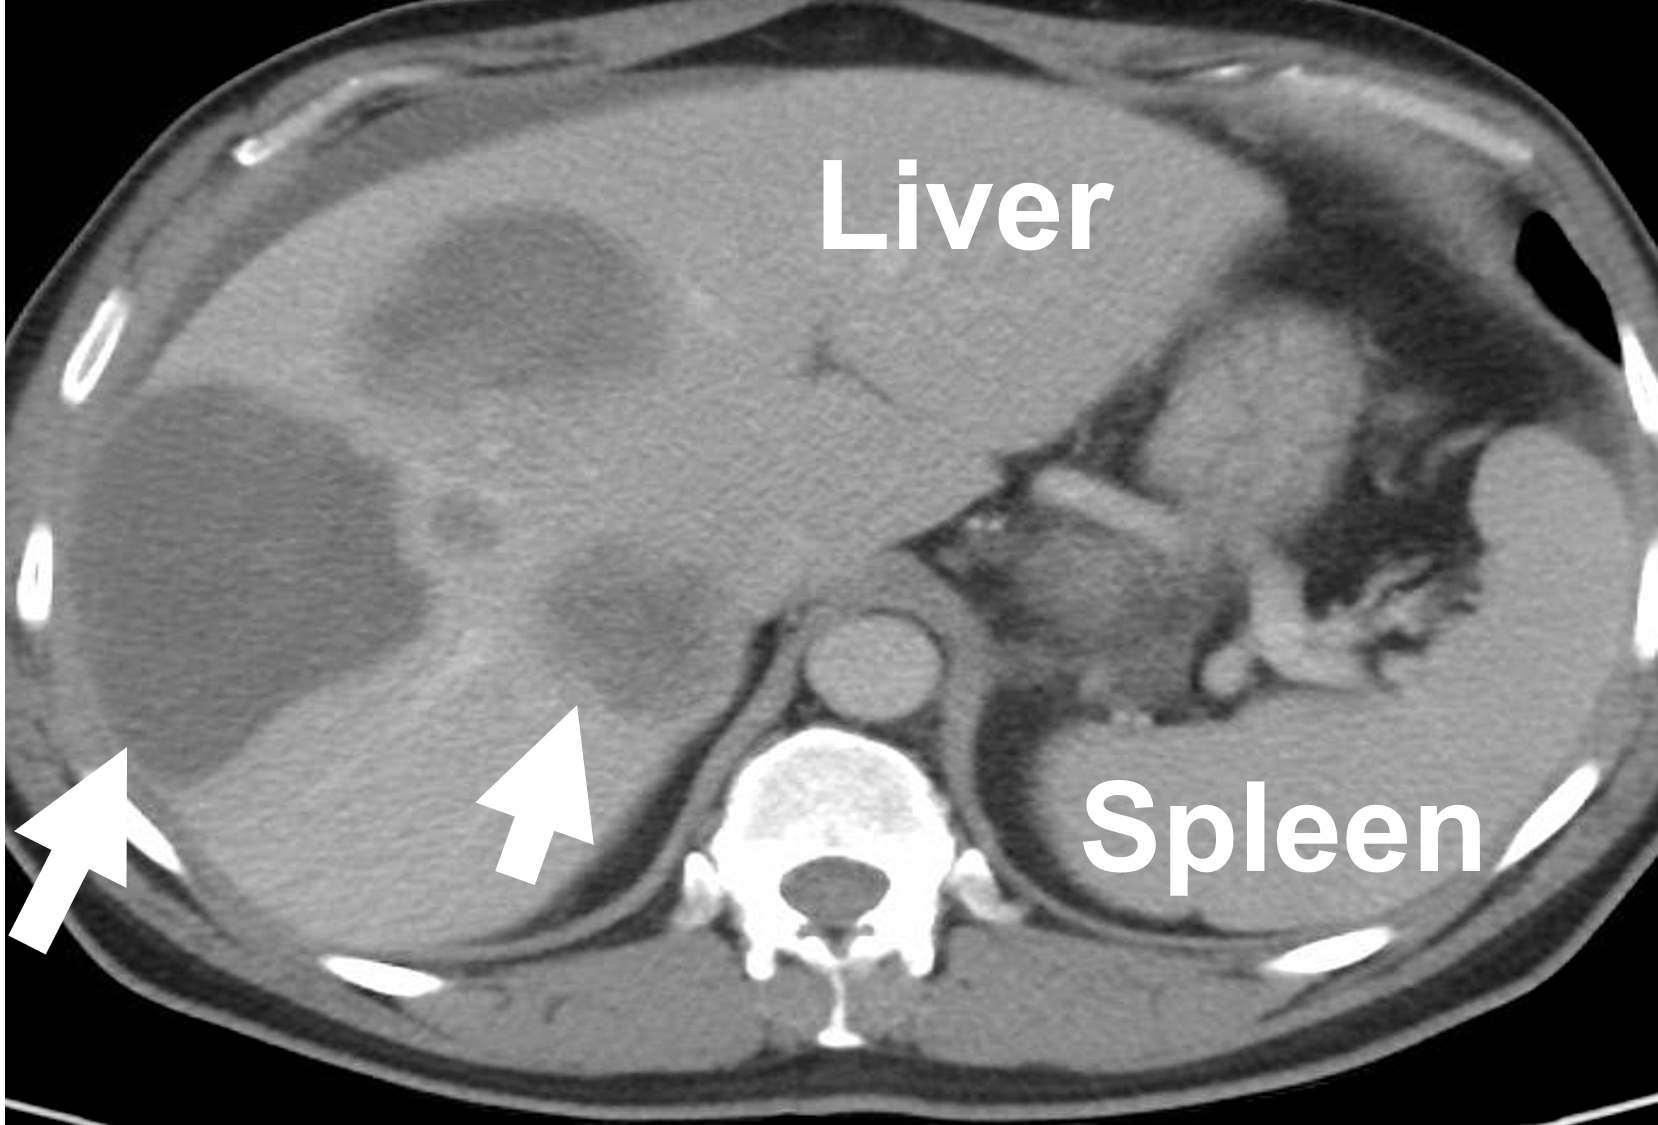 CT showing liver metastasis (arrows) from an adrenal cancer arising from the right left gland. This tumor overproduced estrogen causing feminization (acquisition of female traits in a male).